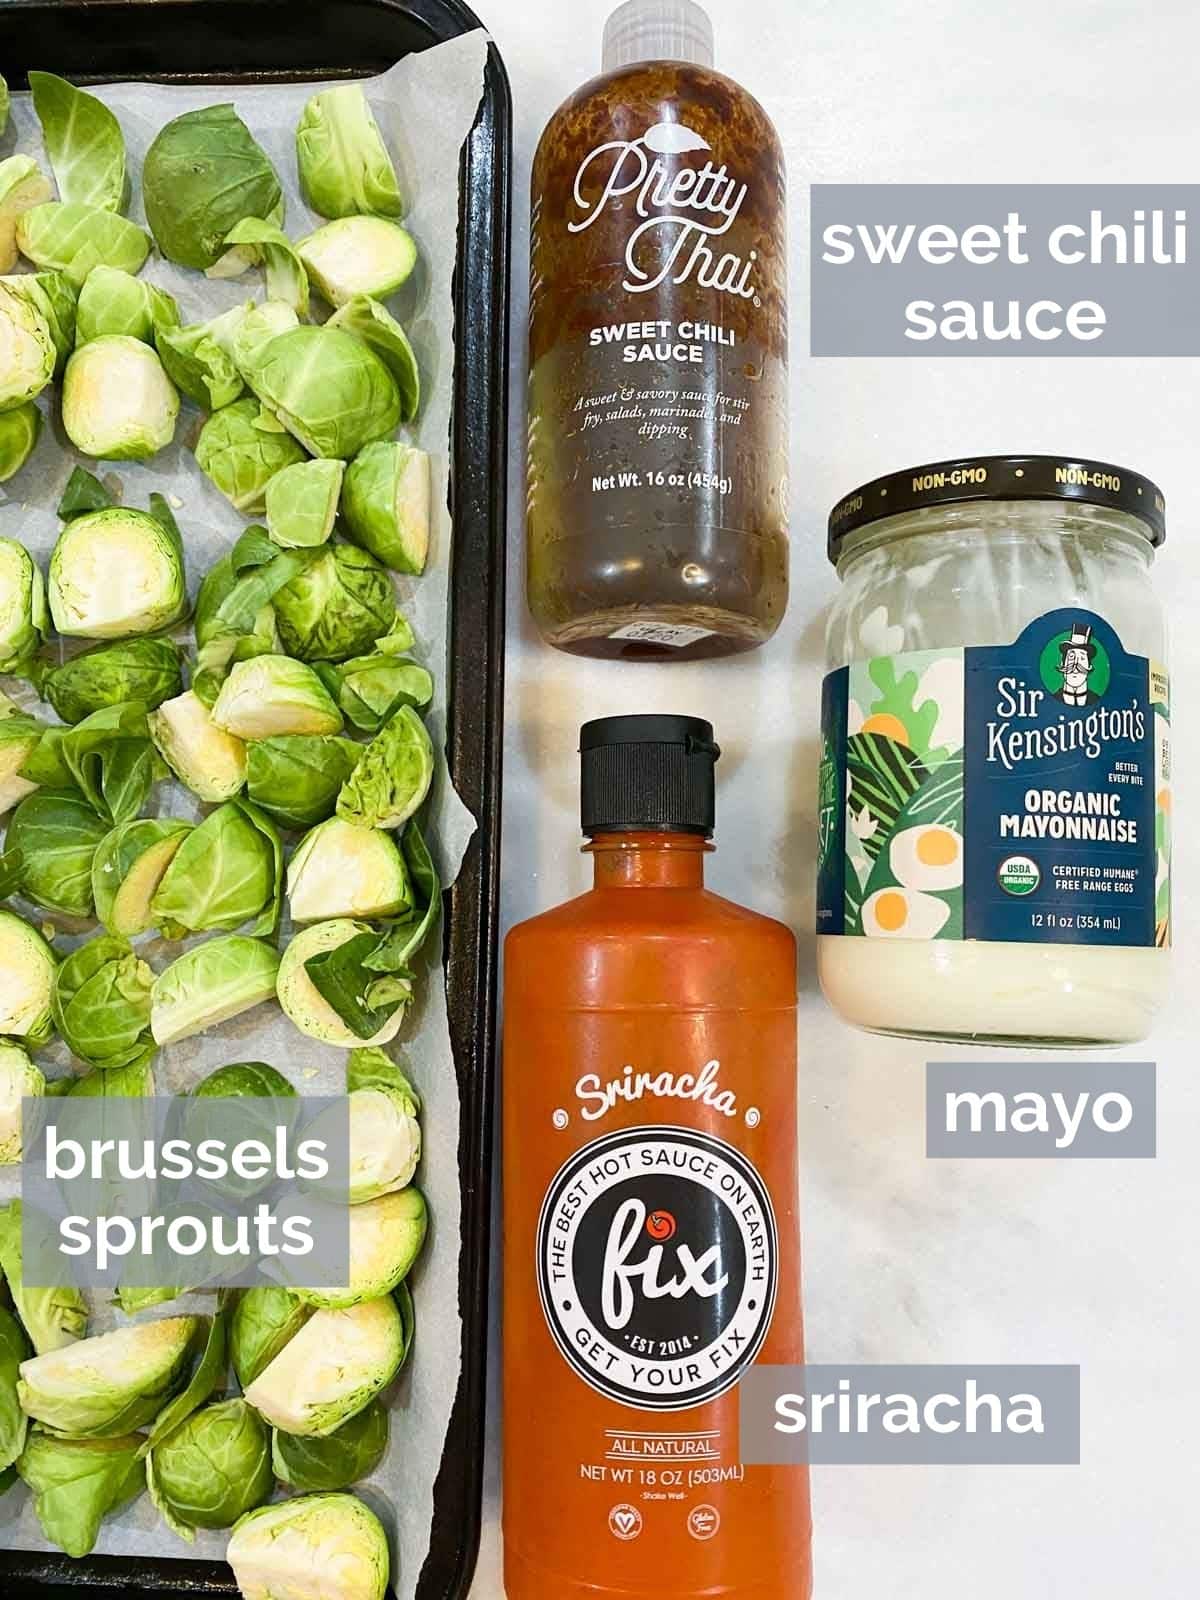 Sweet chili sauce, brussels sprouts, sriracha, and mayo on a marble table